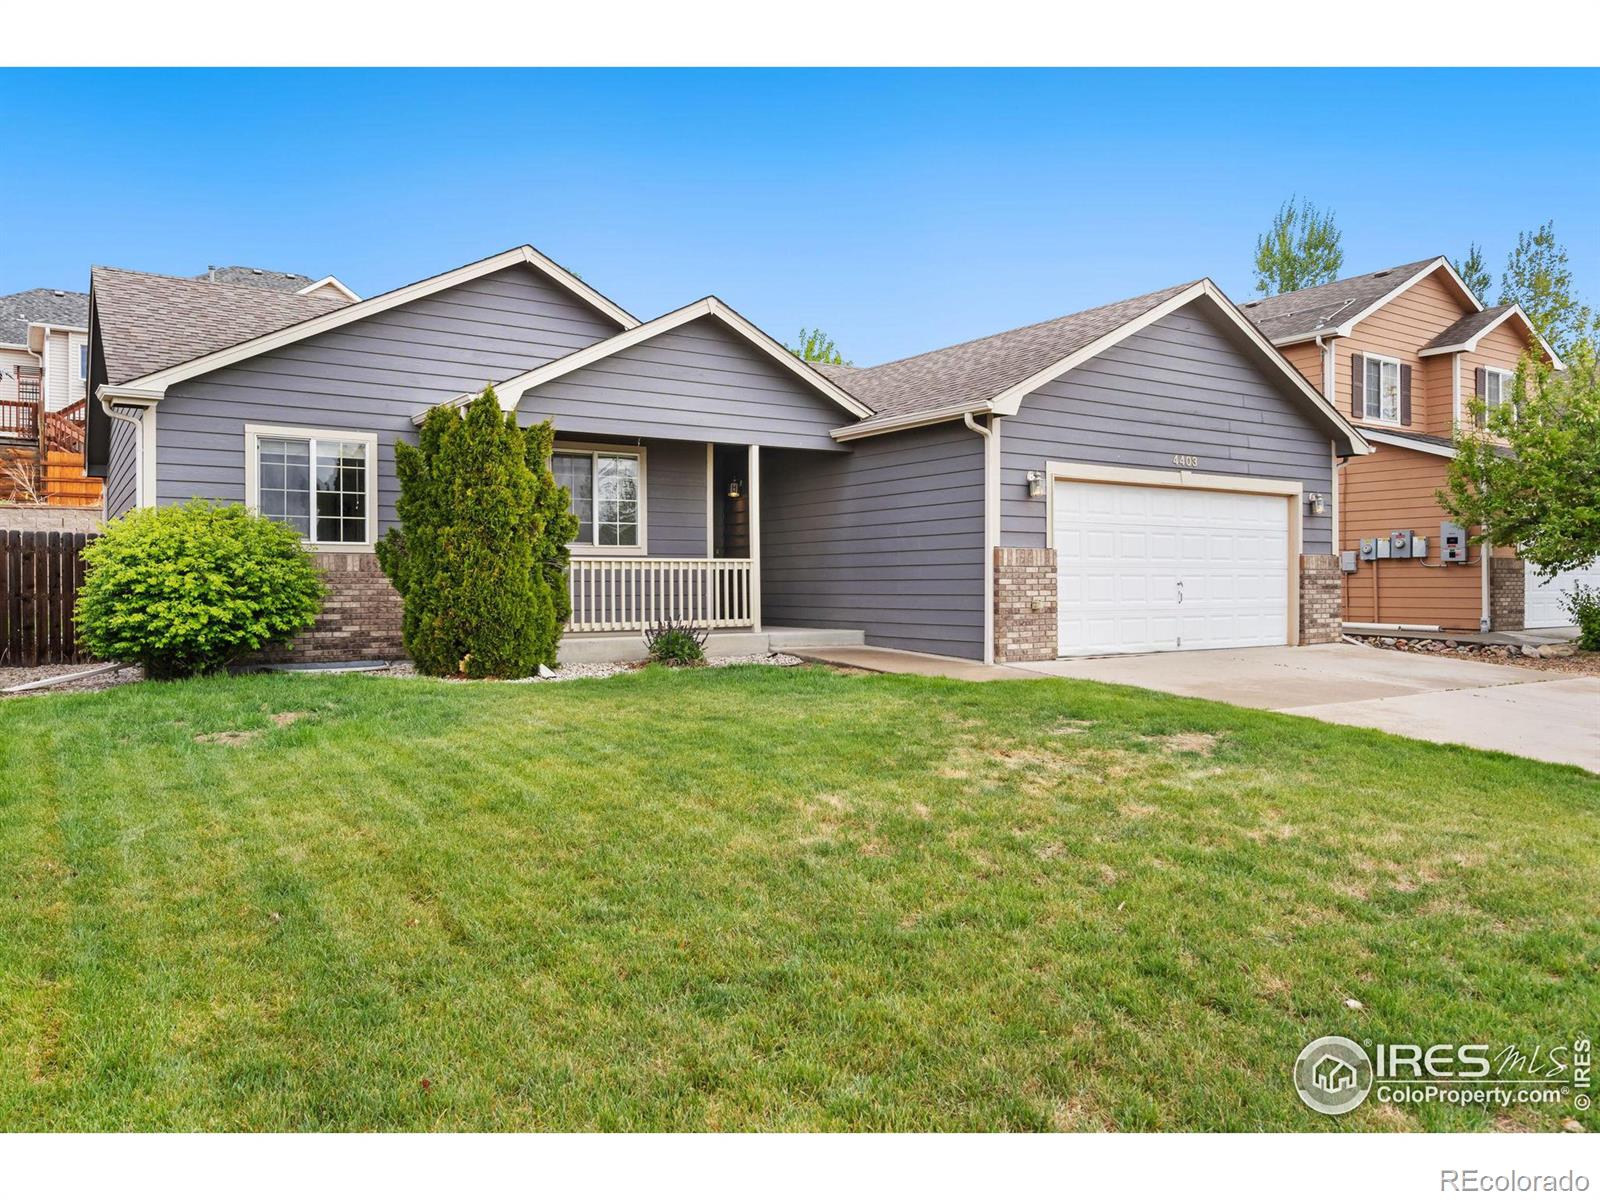 4403 W 30th St Rd, greeley MLS: 4567891008988 Beds: 3 Baths: 2 Price: $439,900